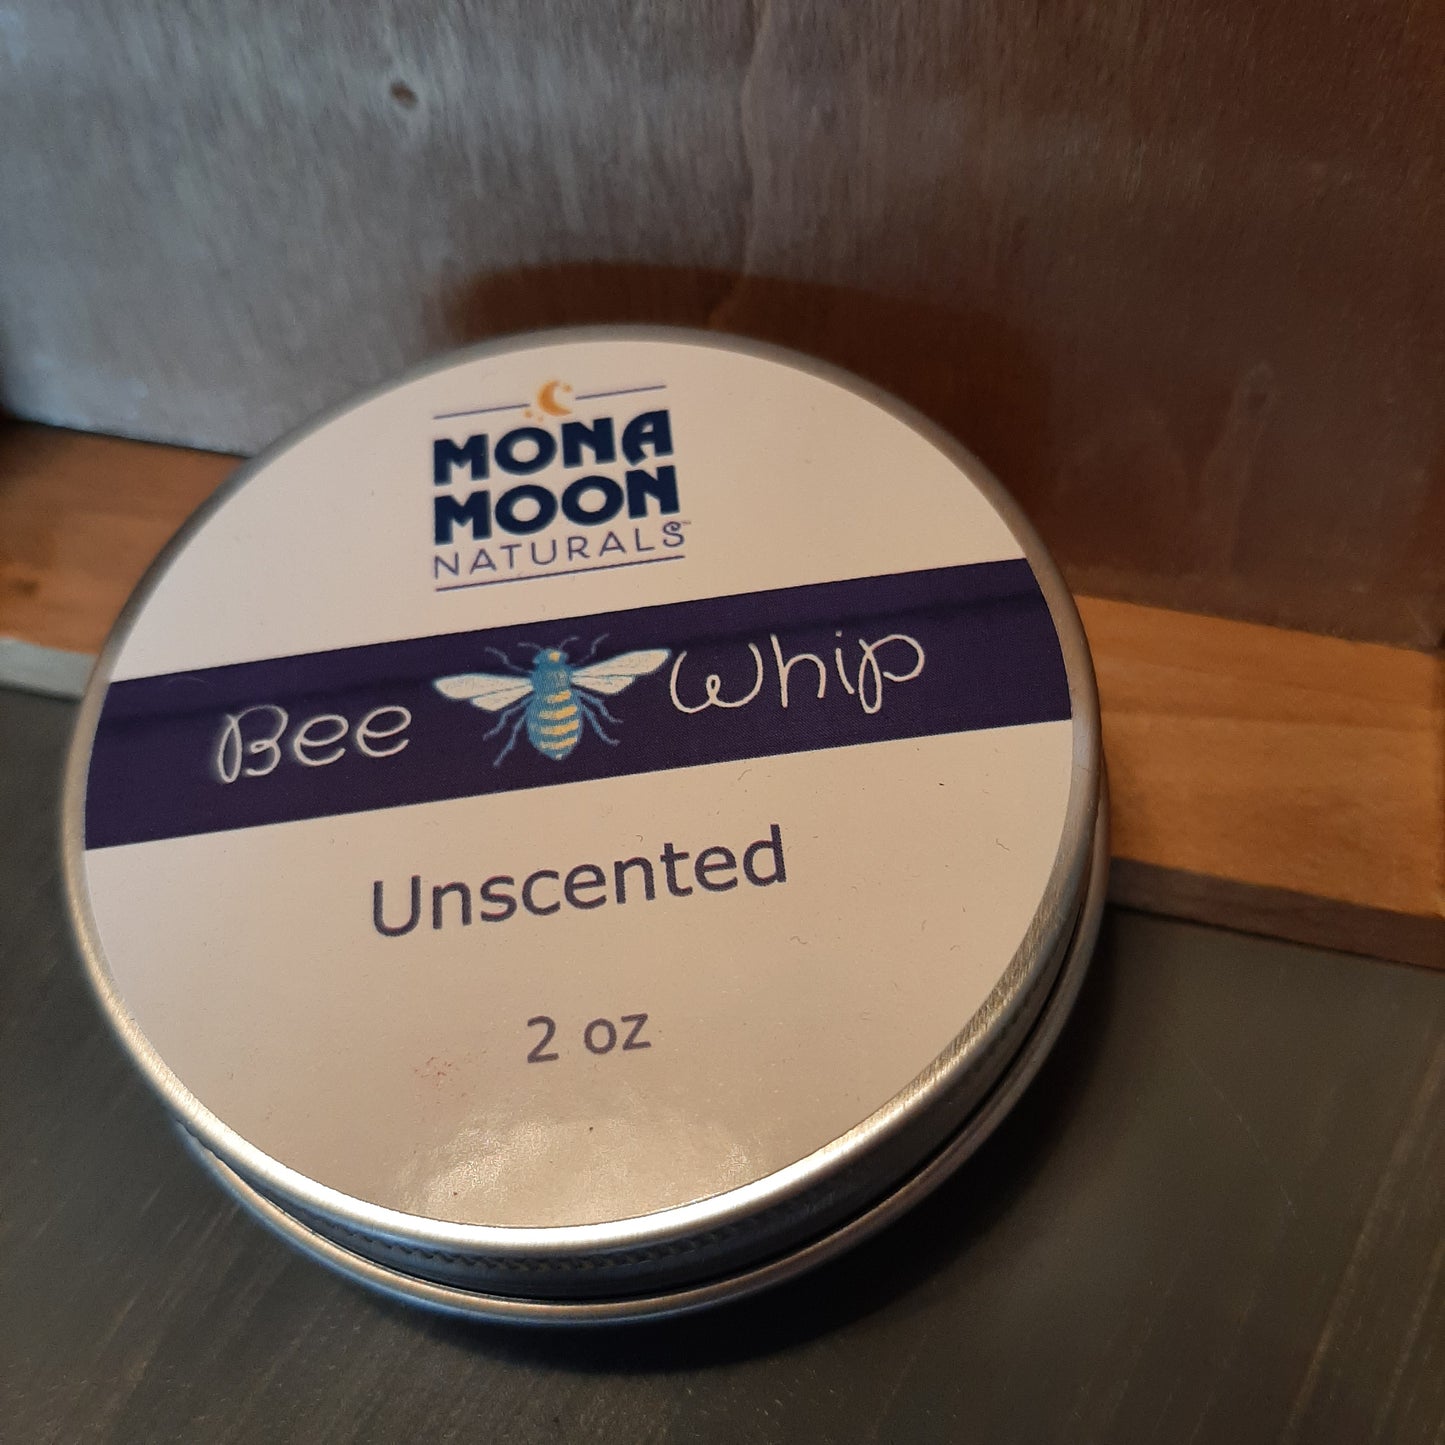 All-natural bee whip, Unscented